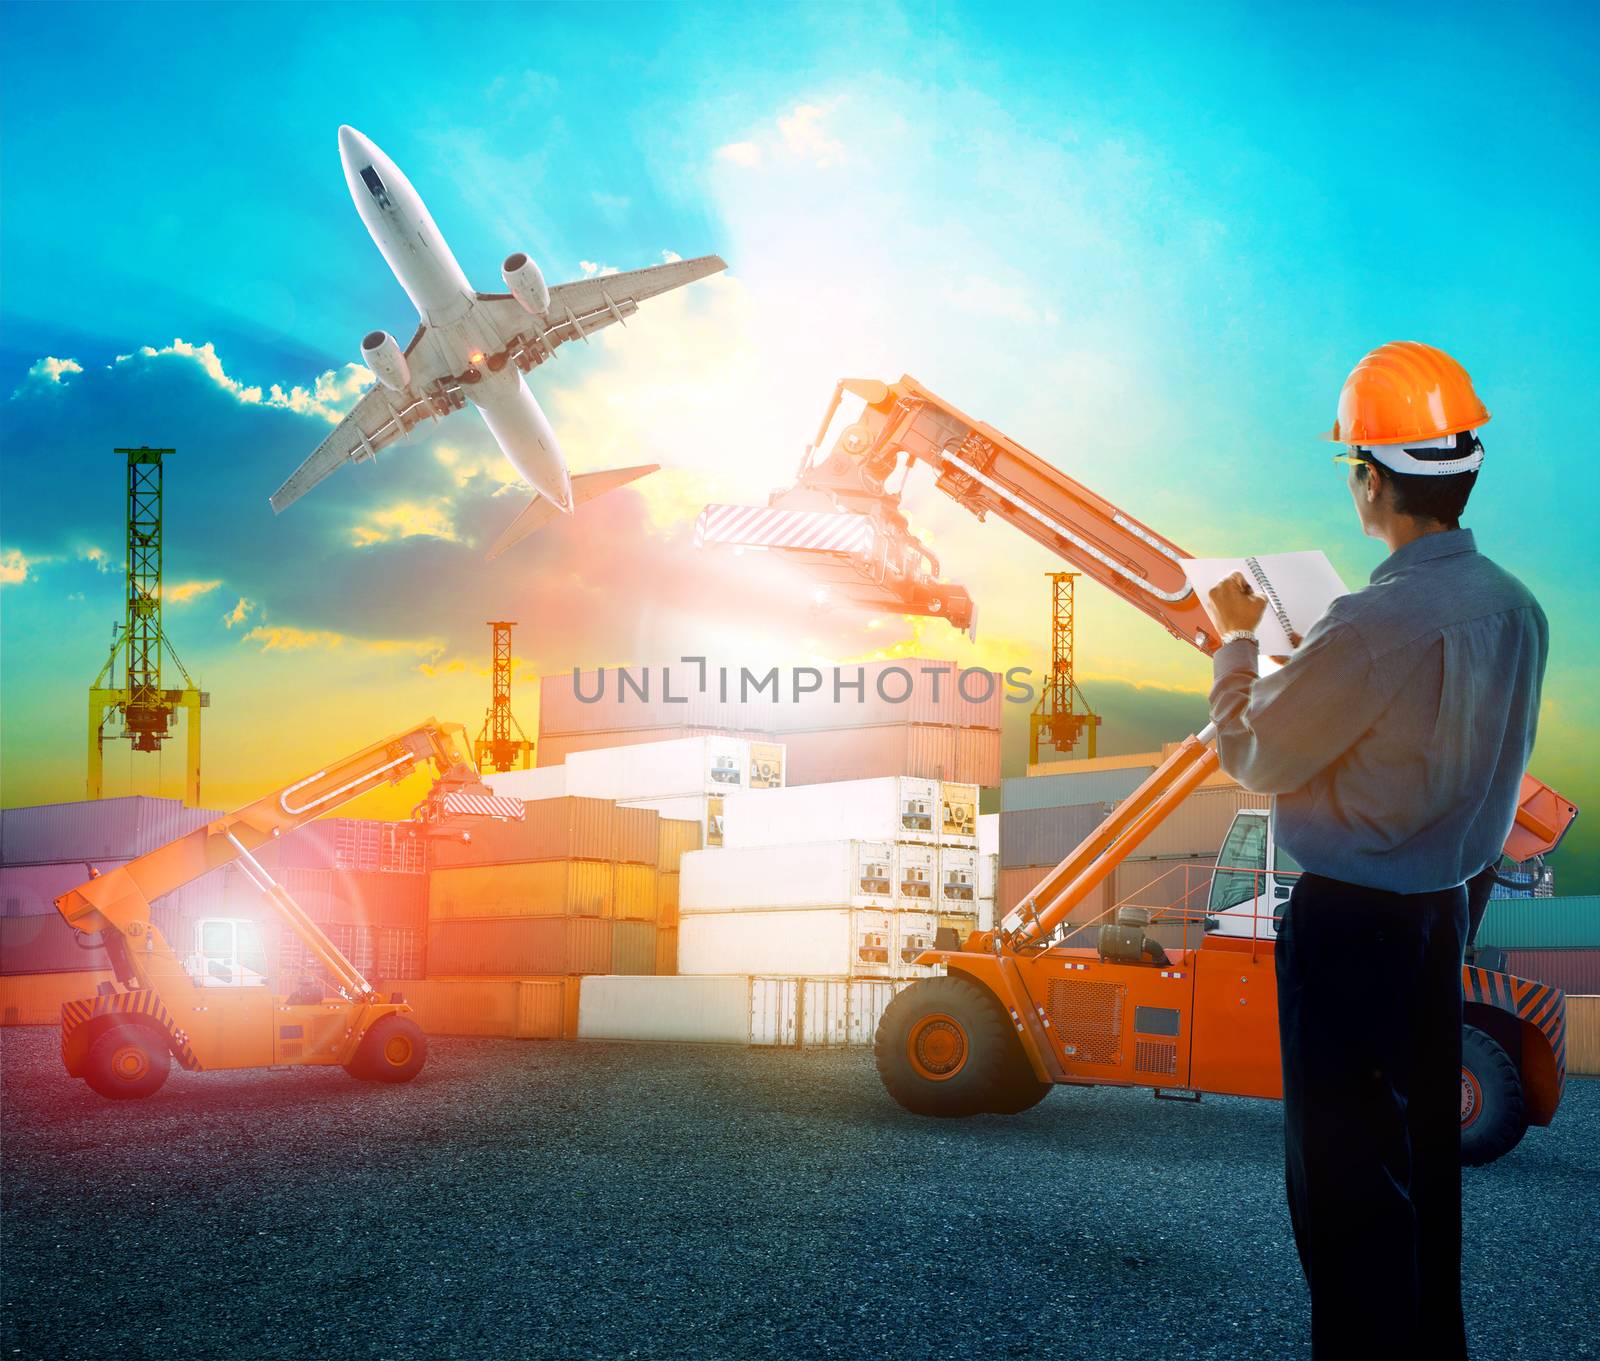 working man in logistic business working in container shipping yard with dusky sky and jet plane cargo flying above use for land to air transport and freight